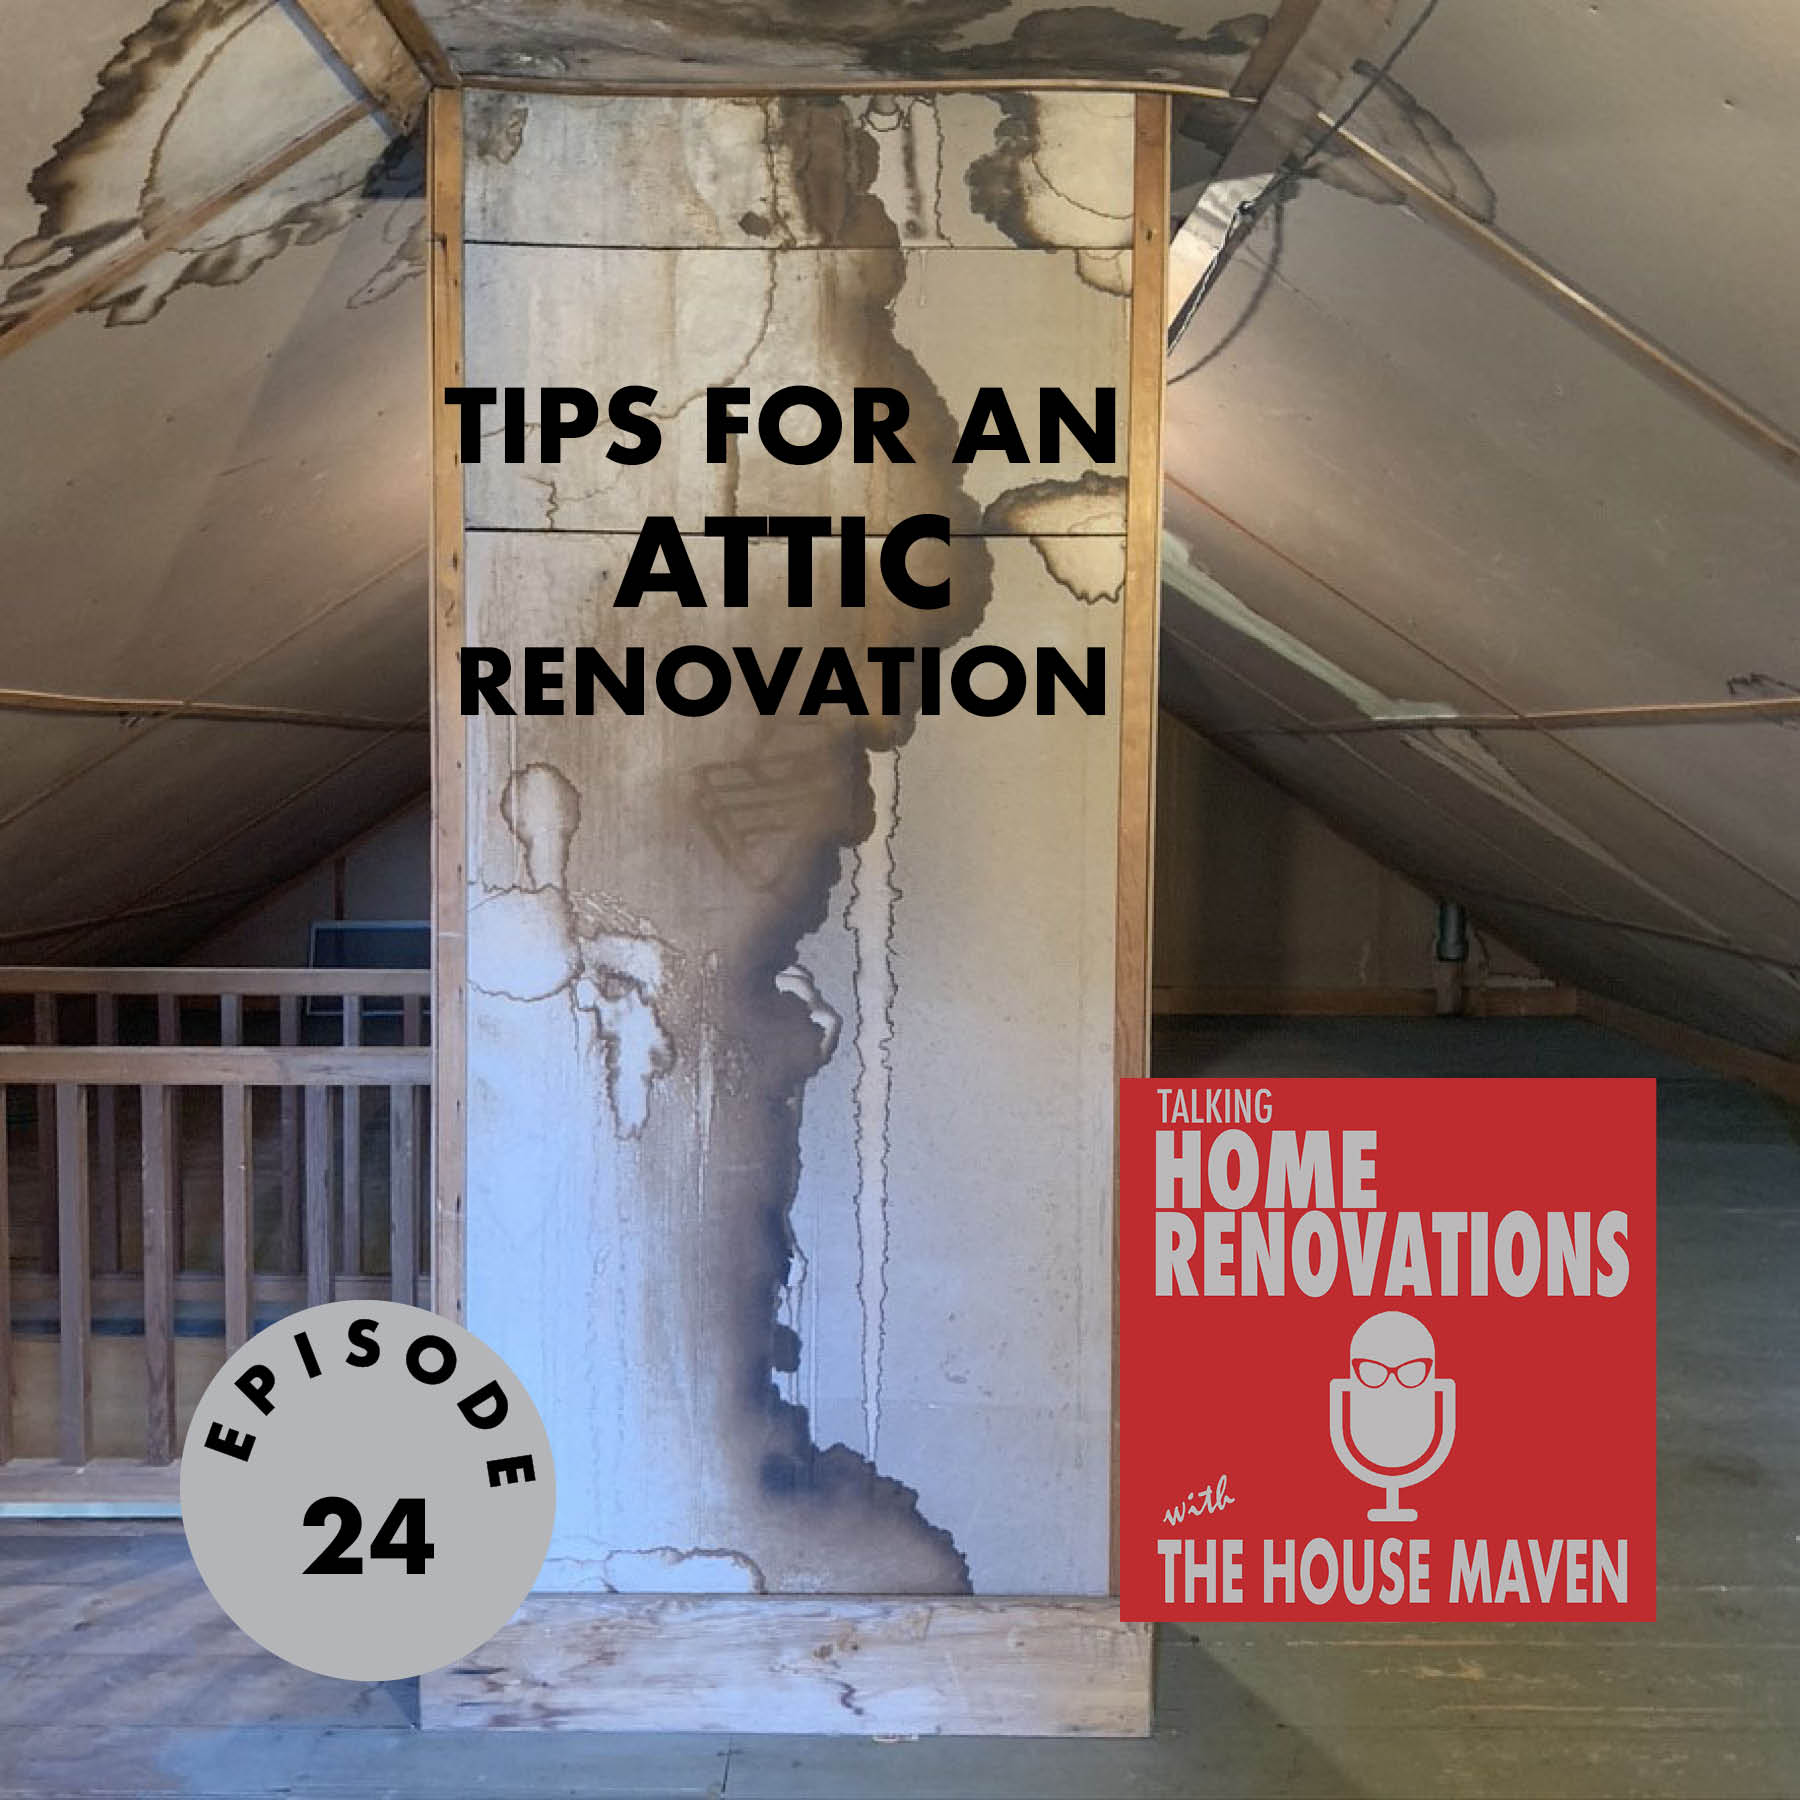 Tips for an Attic Renovation